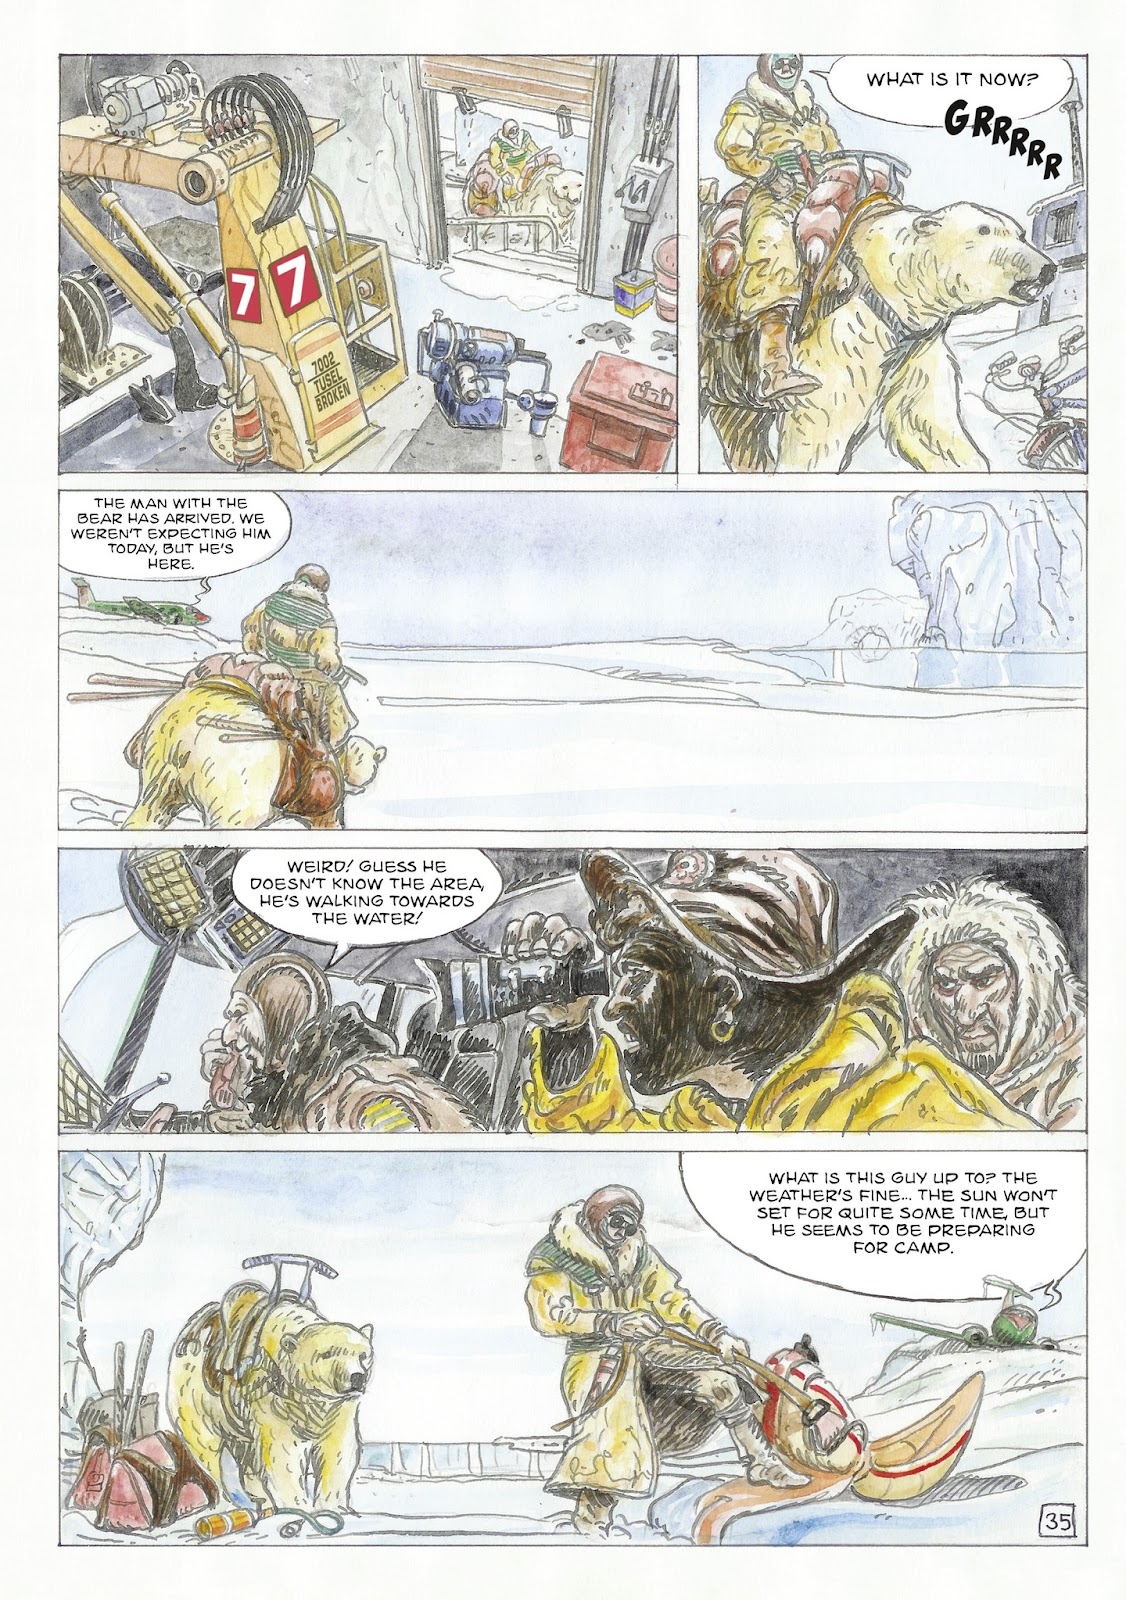 The Man With the Bear issue 1 - Page 37